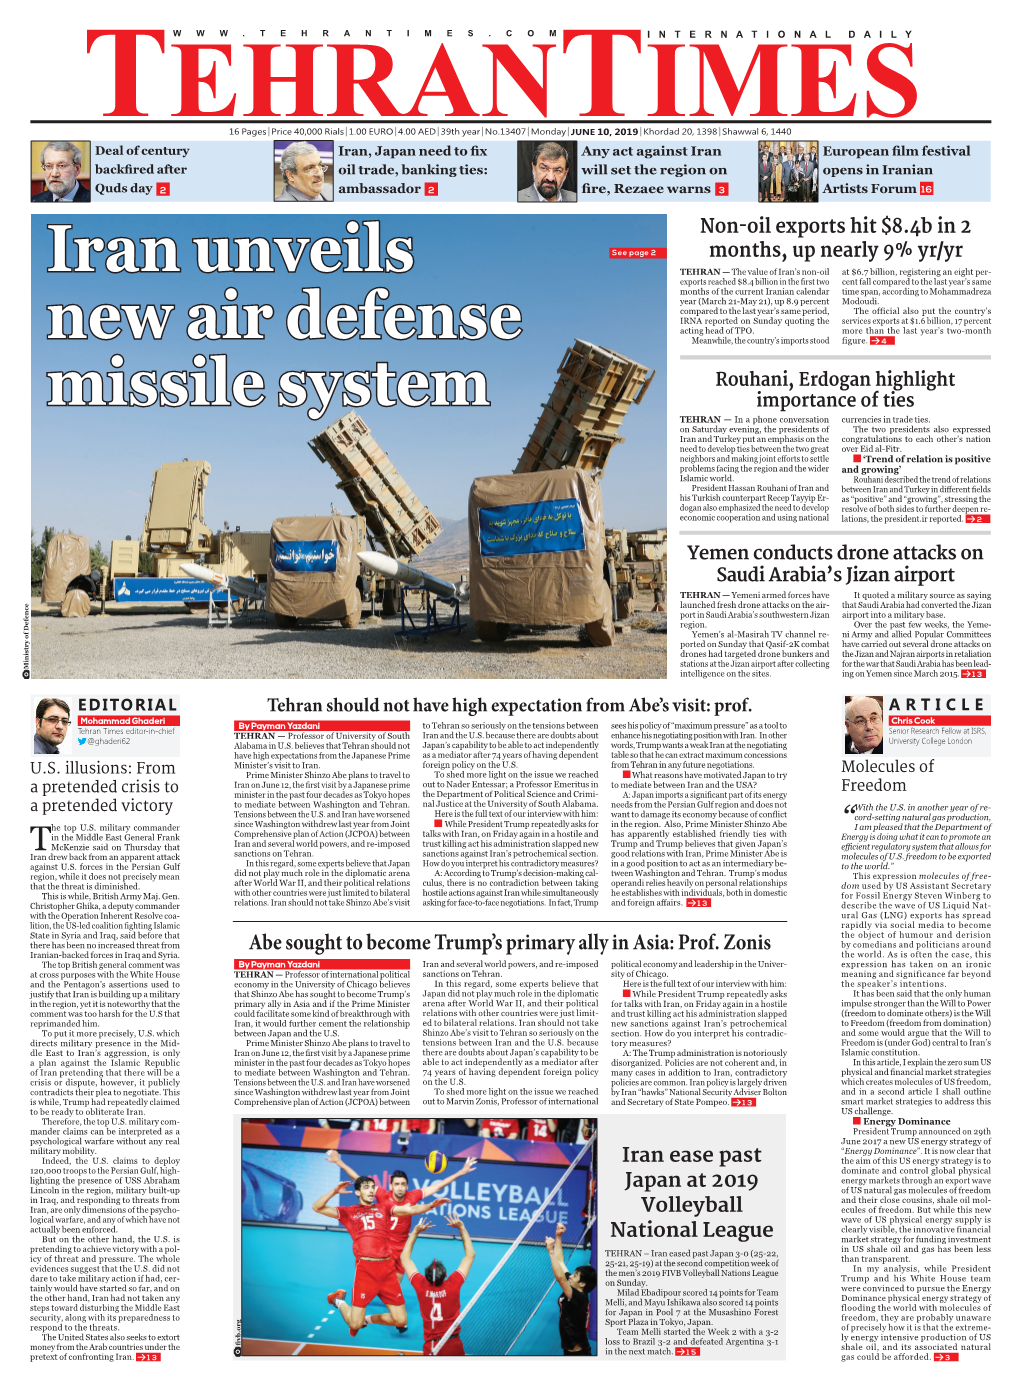 Iran Unveils New Air Defense Missile System